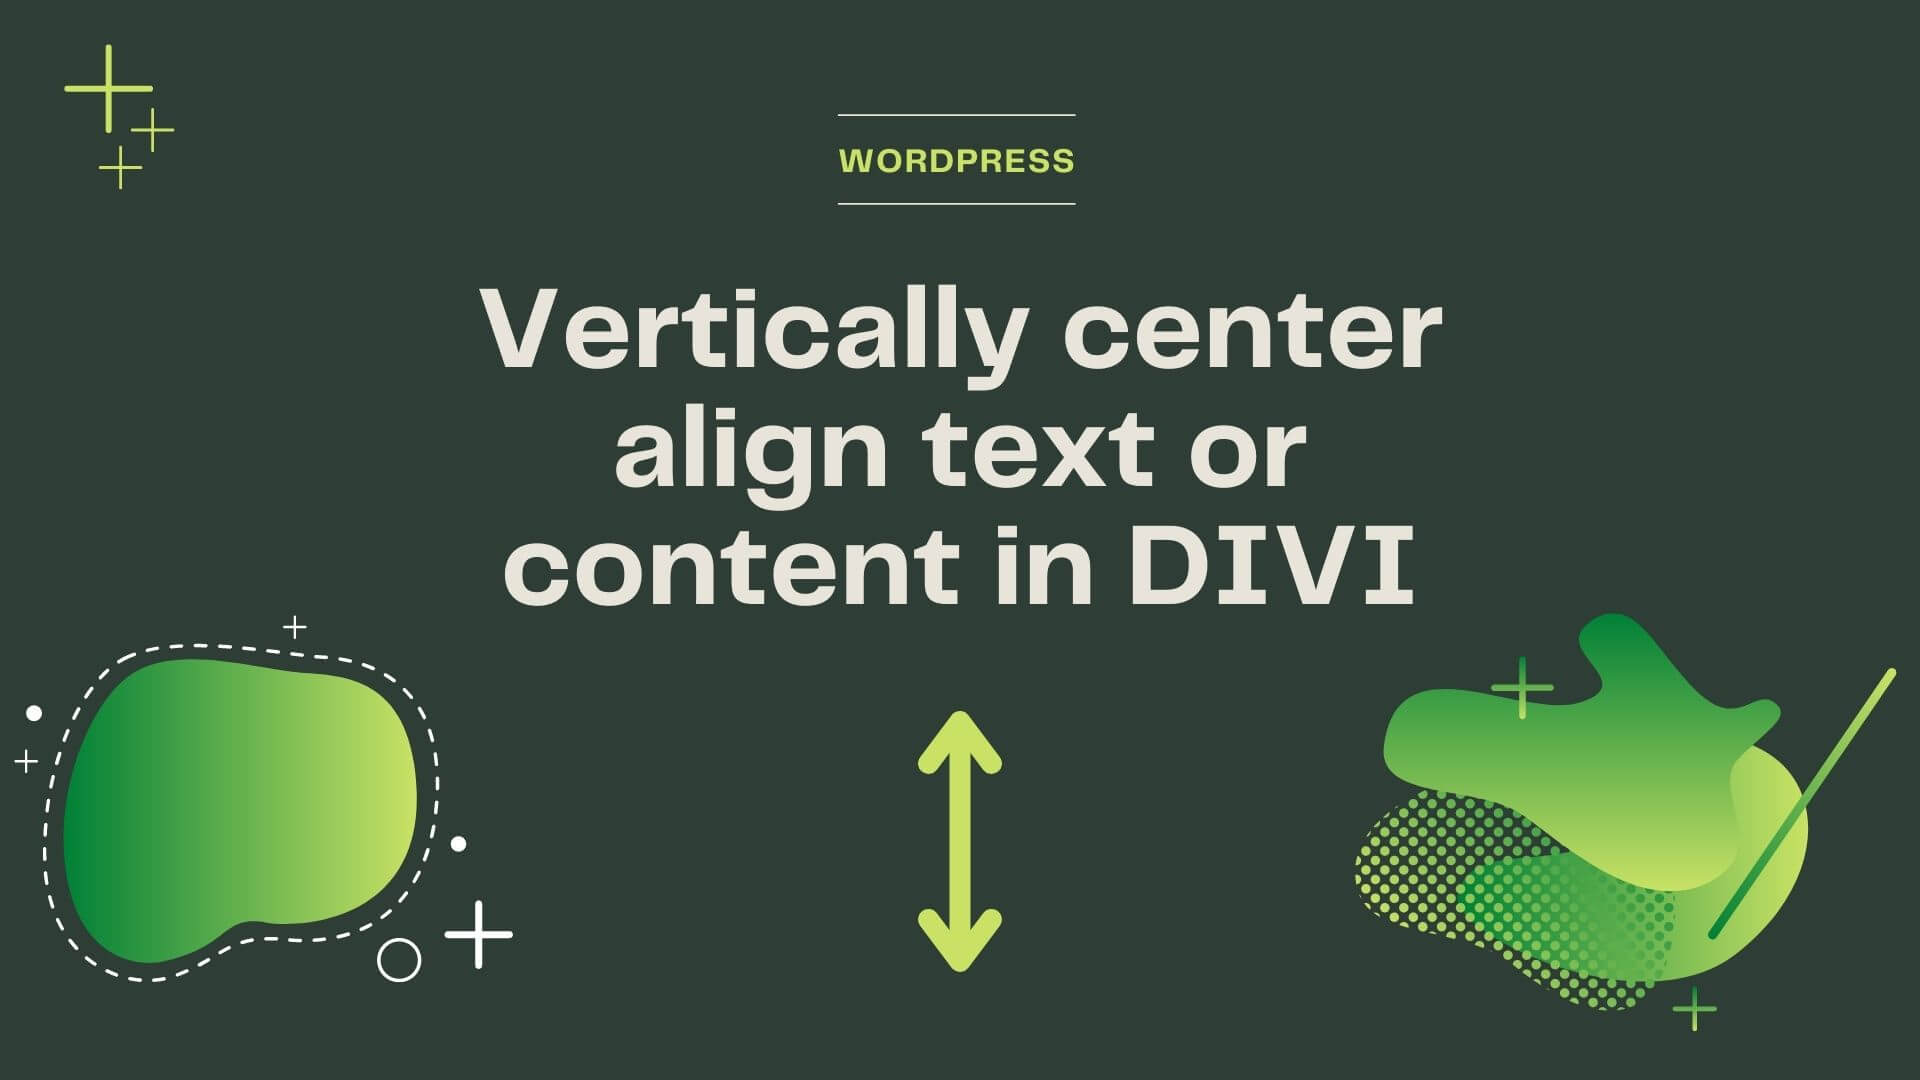 How to vertically centralize text or content in DIVI